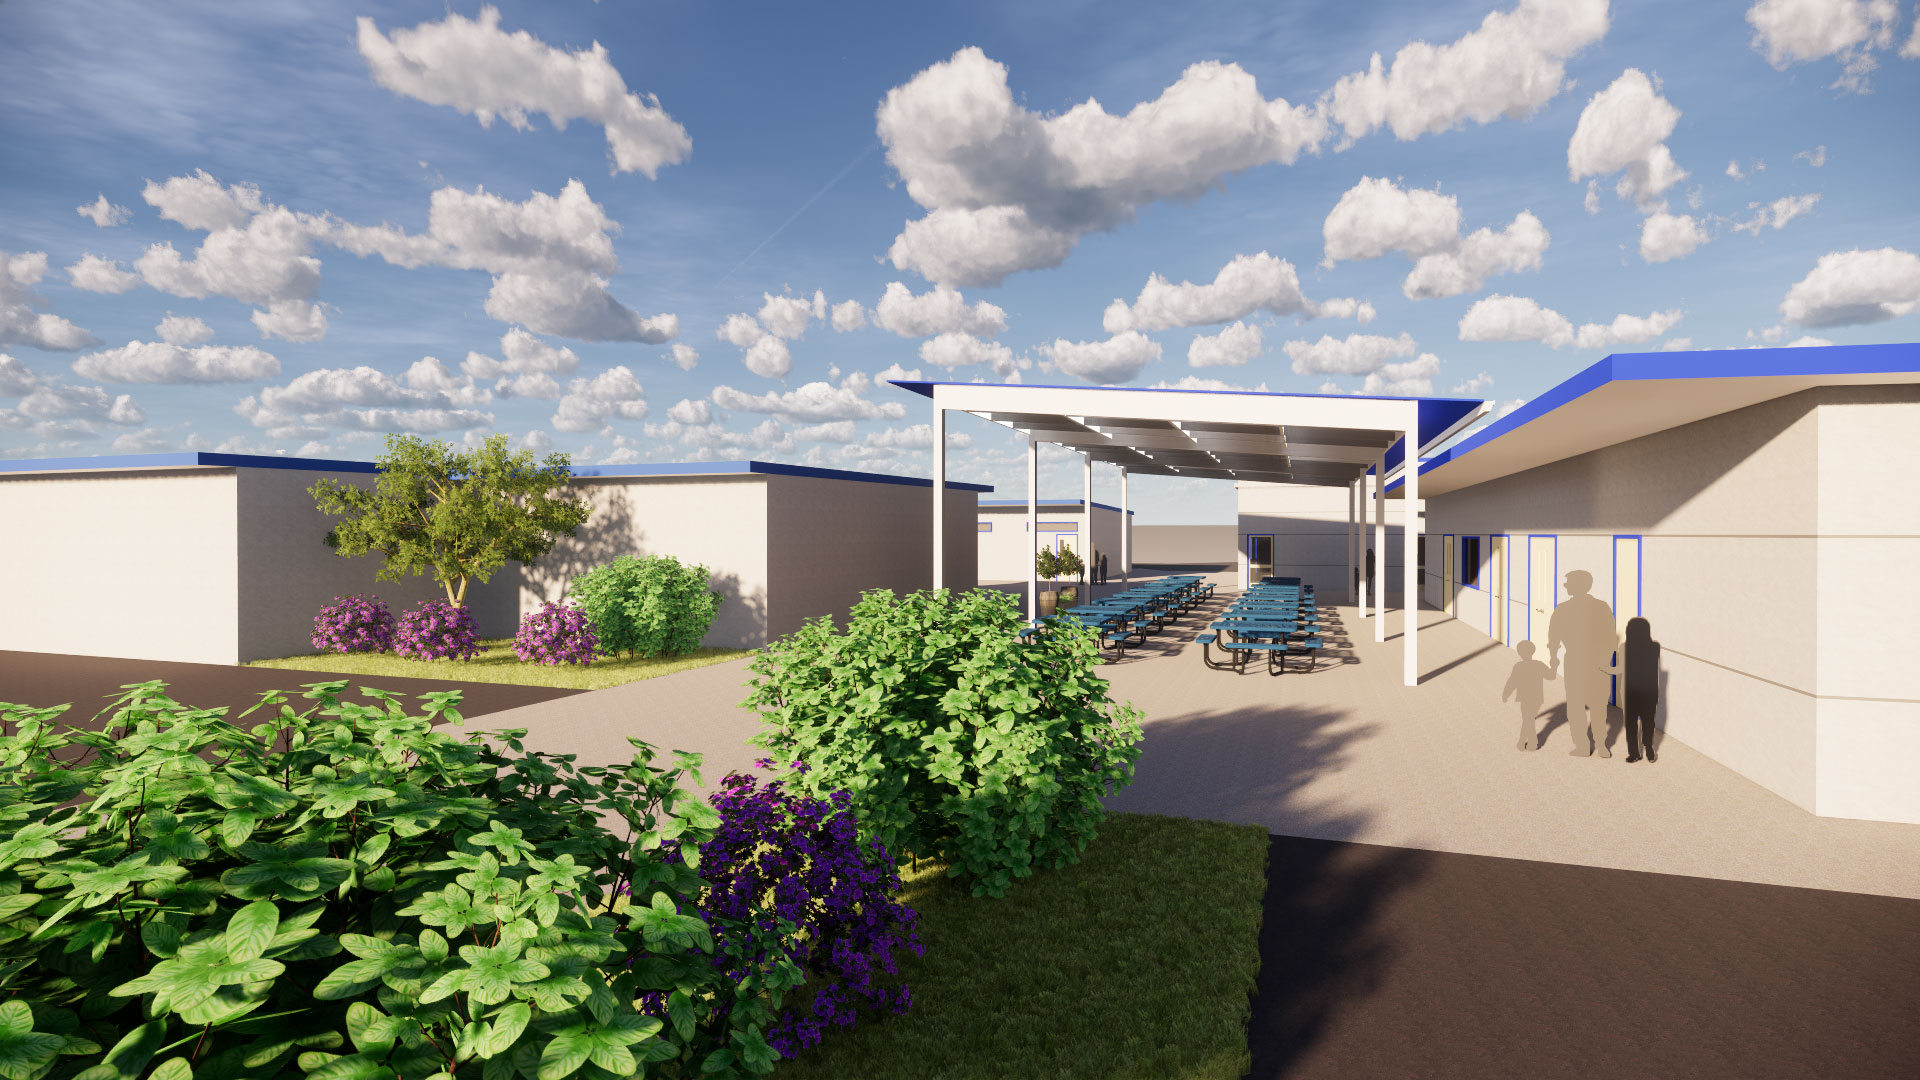 Early render of shade structure, with white poles and supports, with a blue roof, over lunch tables.